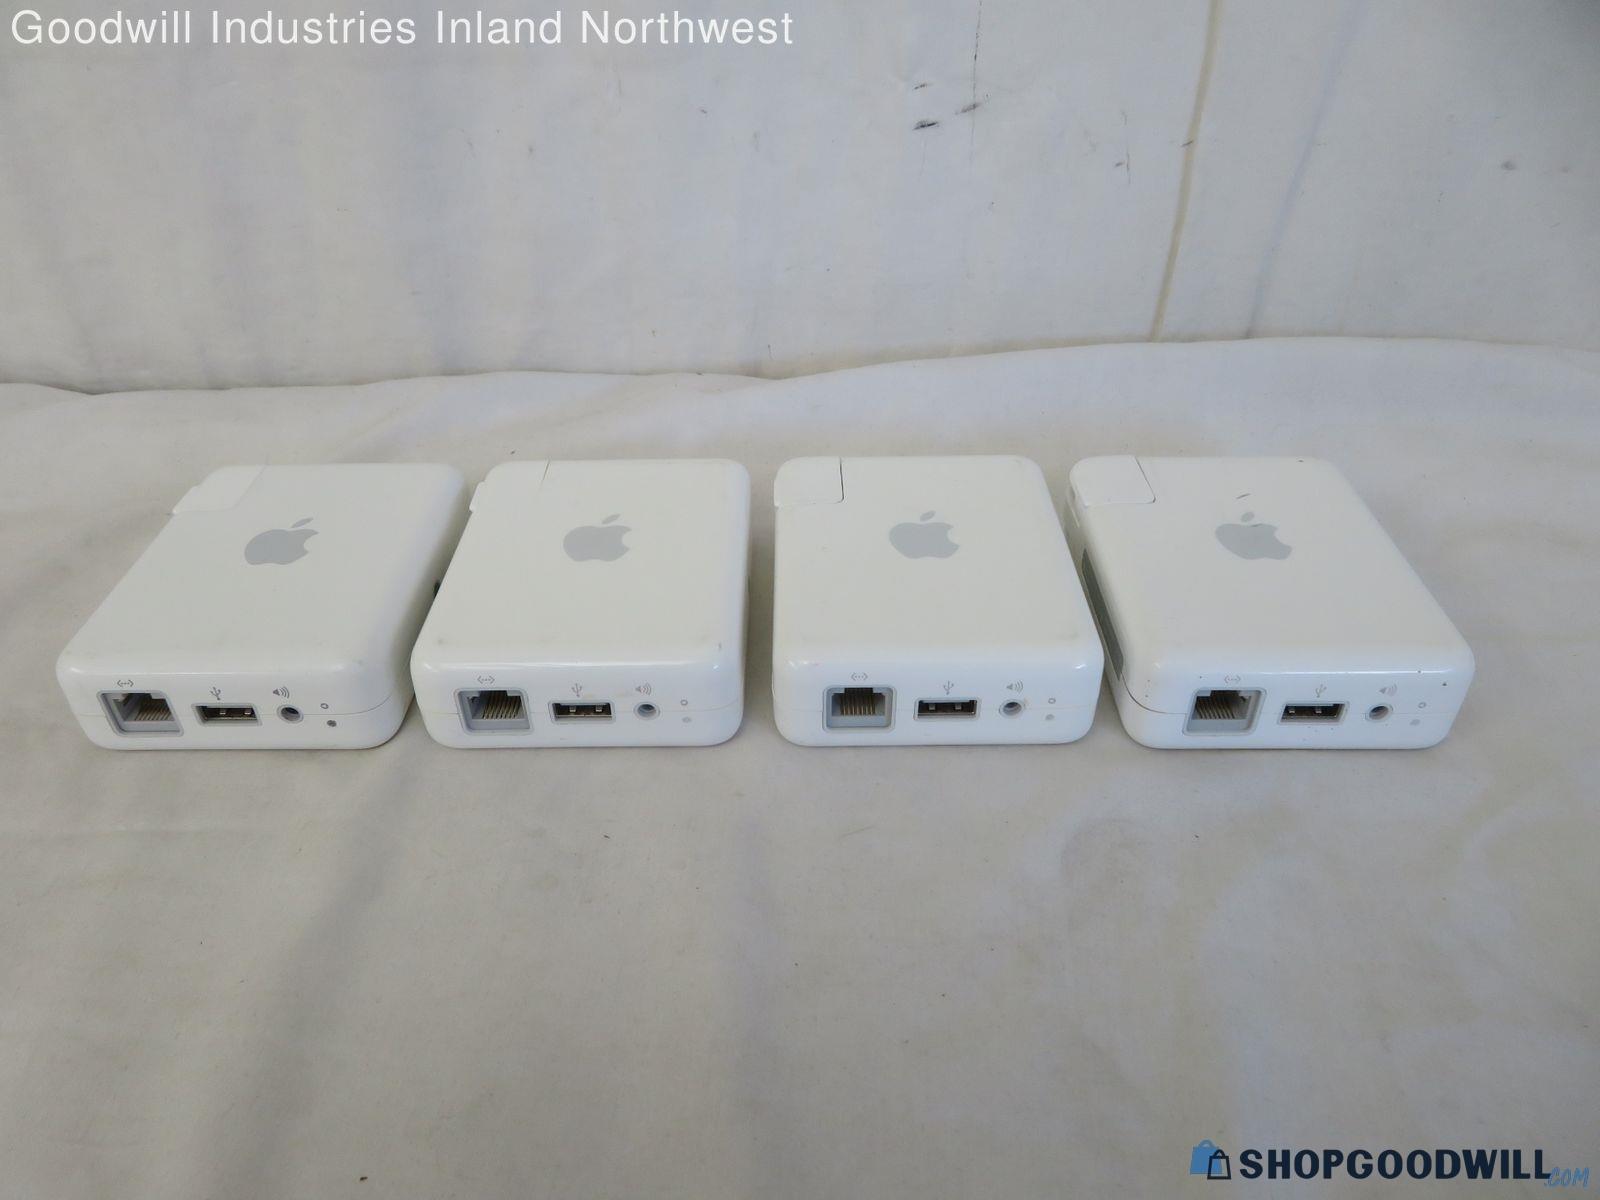 airport express base station a1084